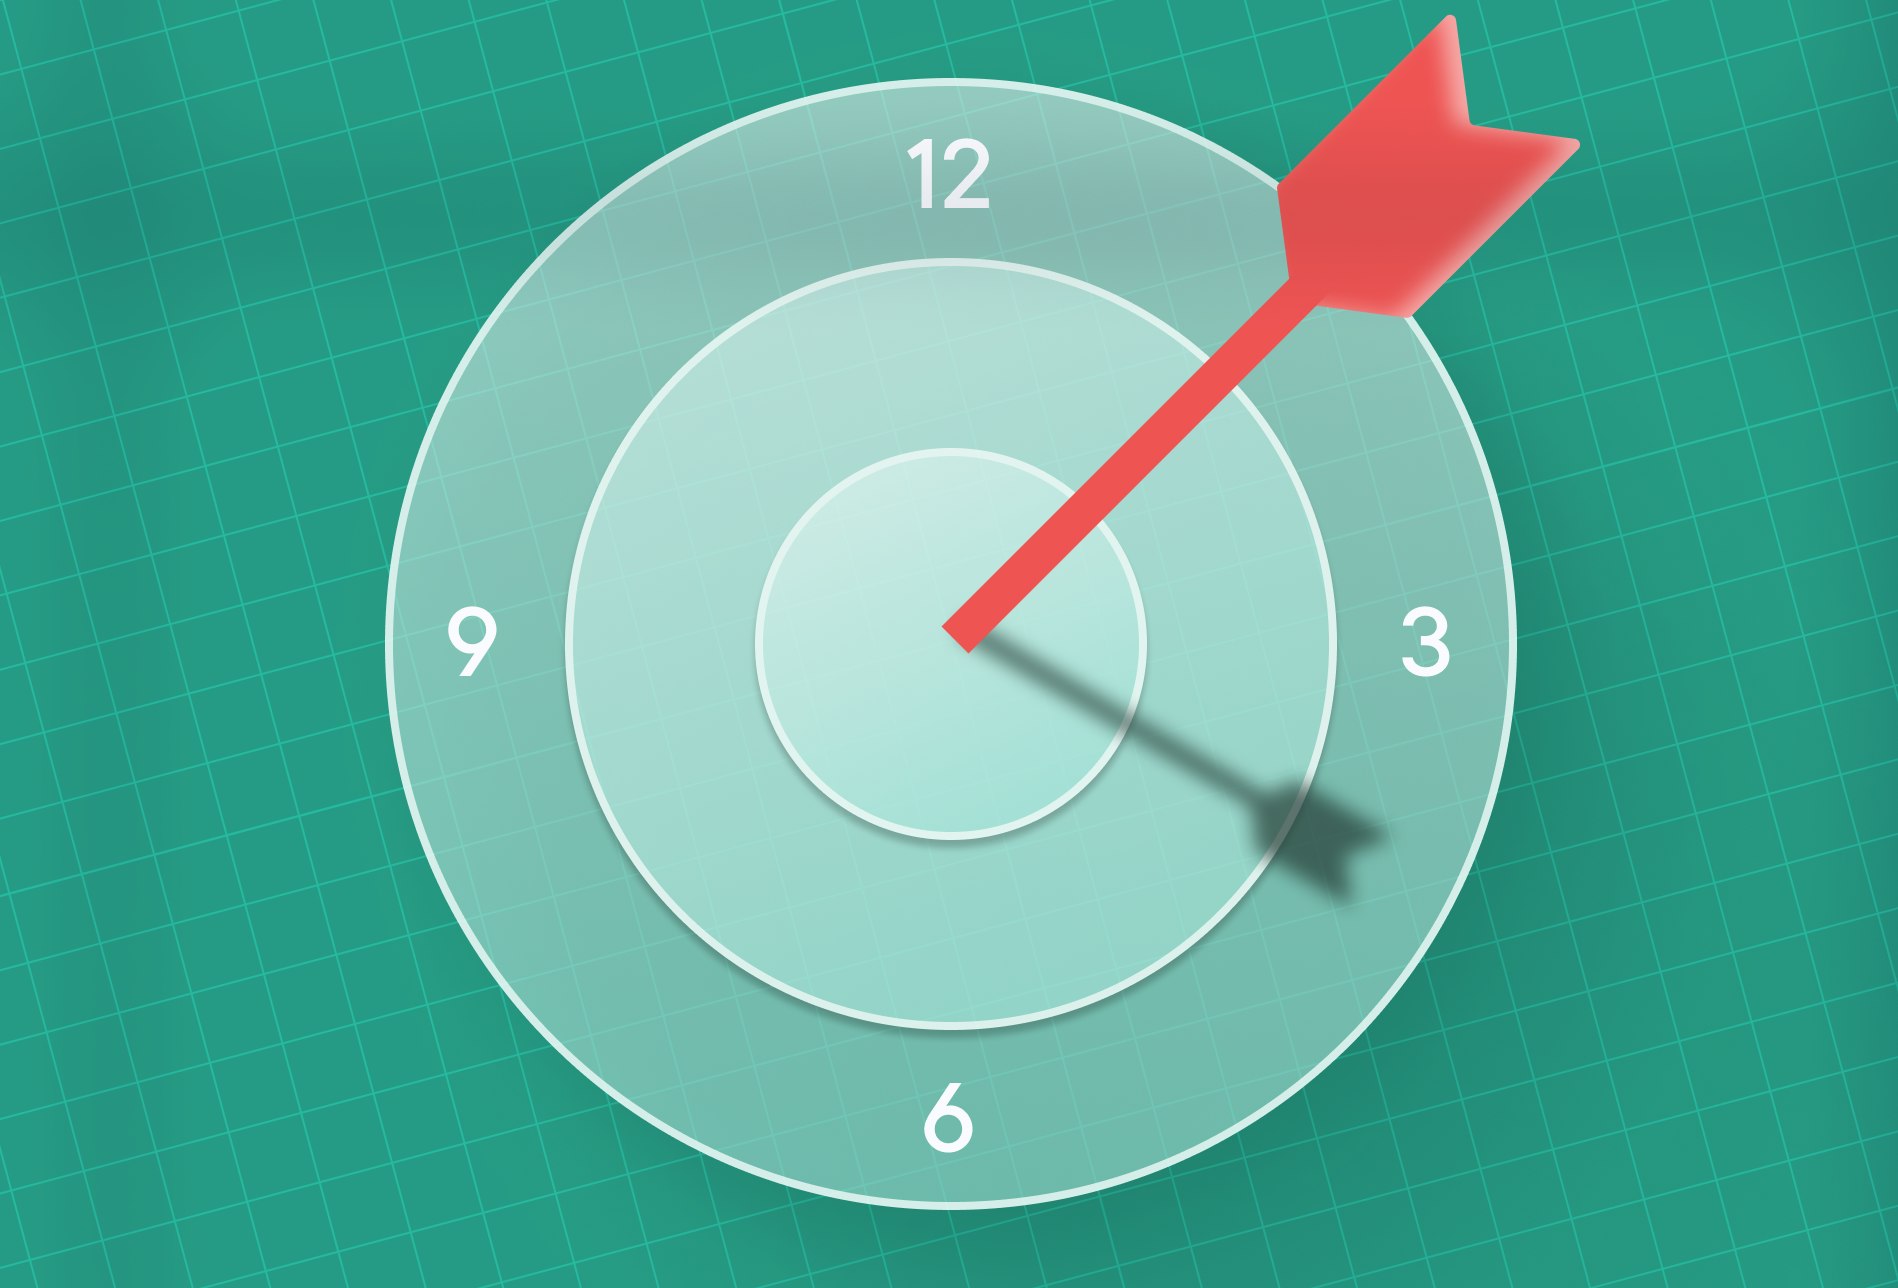 How to save time by optimizing your route: A target which doubles as a clock, with the arrow and the arrow's shadow acting as the hands of the clock.